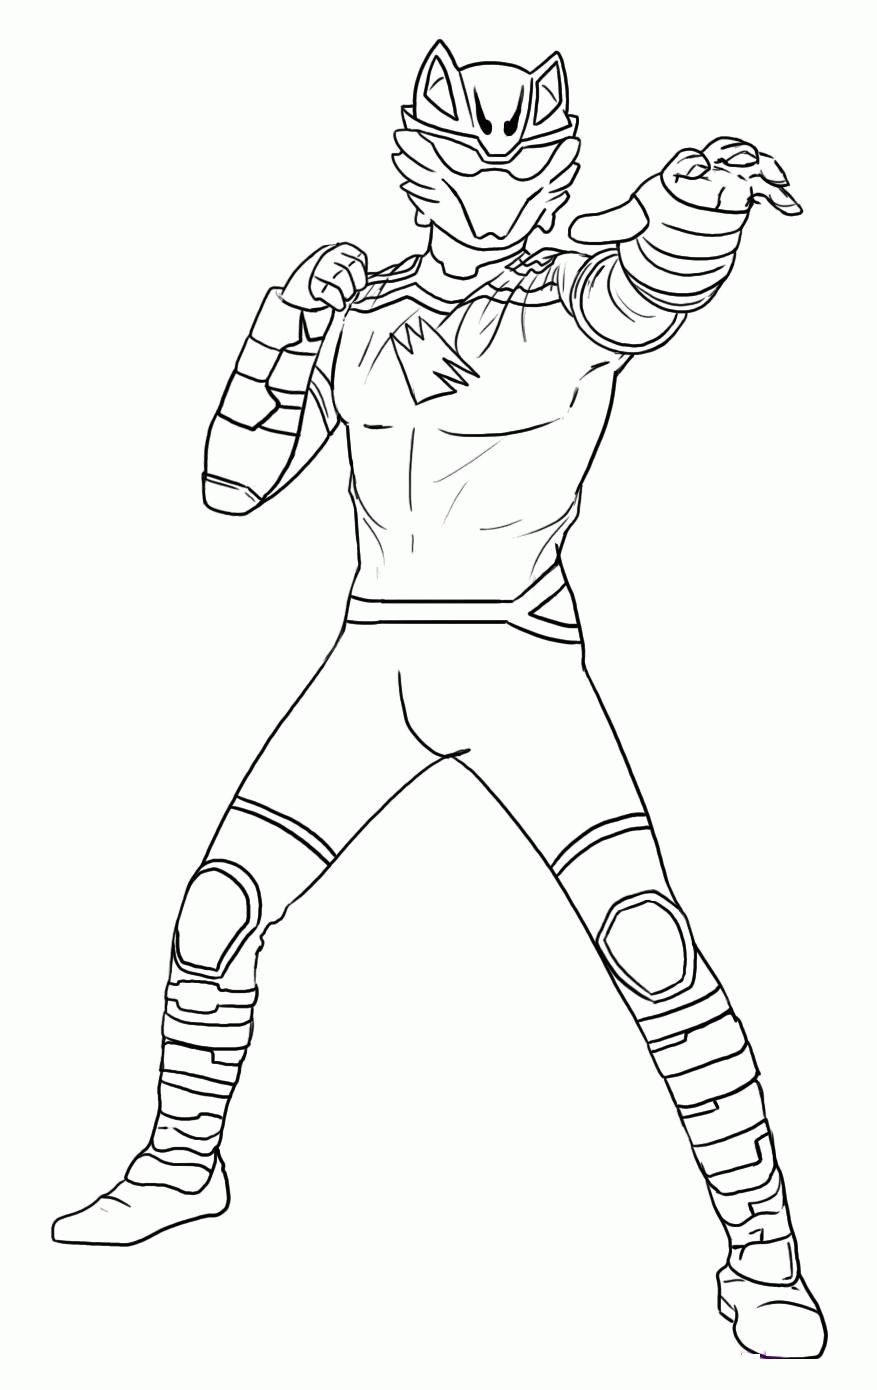 power ranger pictures to color power rangers spd coloring pages to print coloring home ranger color power pictures to 